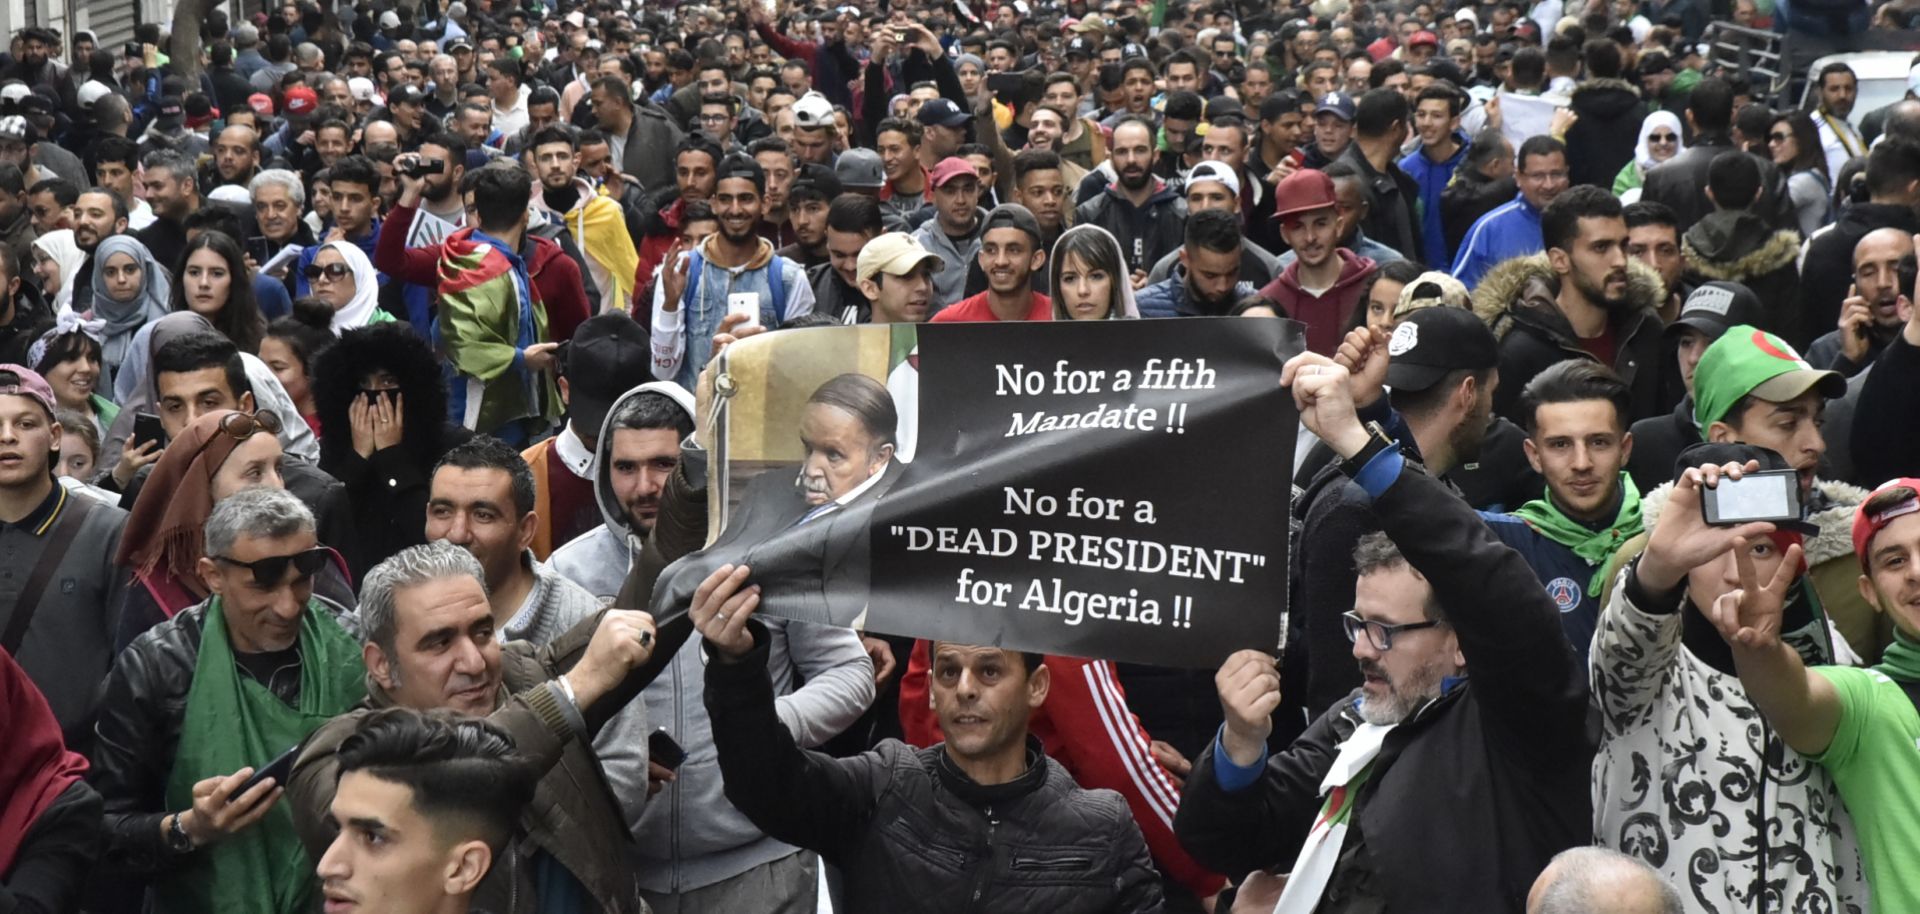 Algerian protesters demonstrate in the capital Algiers against ailing President Abdel Aziz Bouteflika's bid for a fifth term on March 8, 2019.